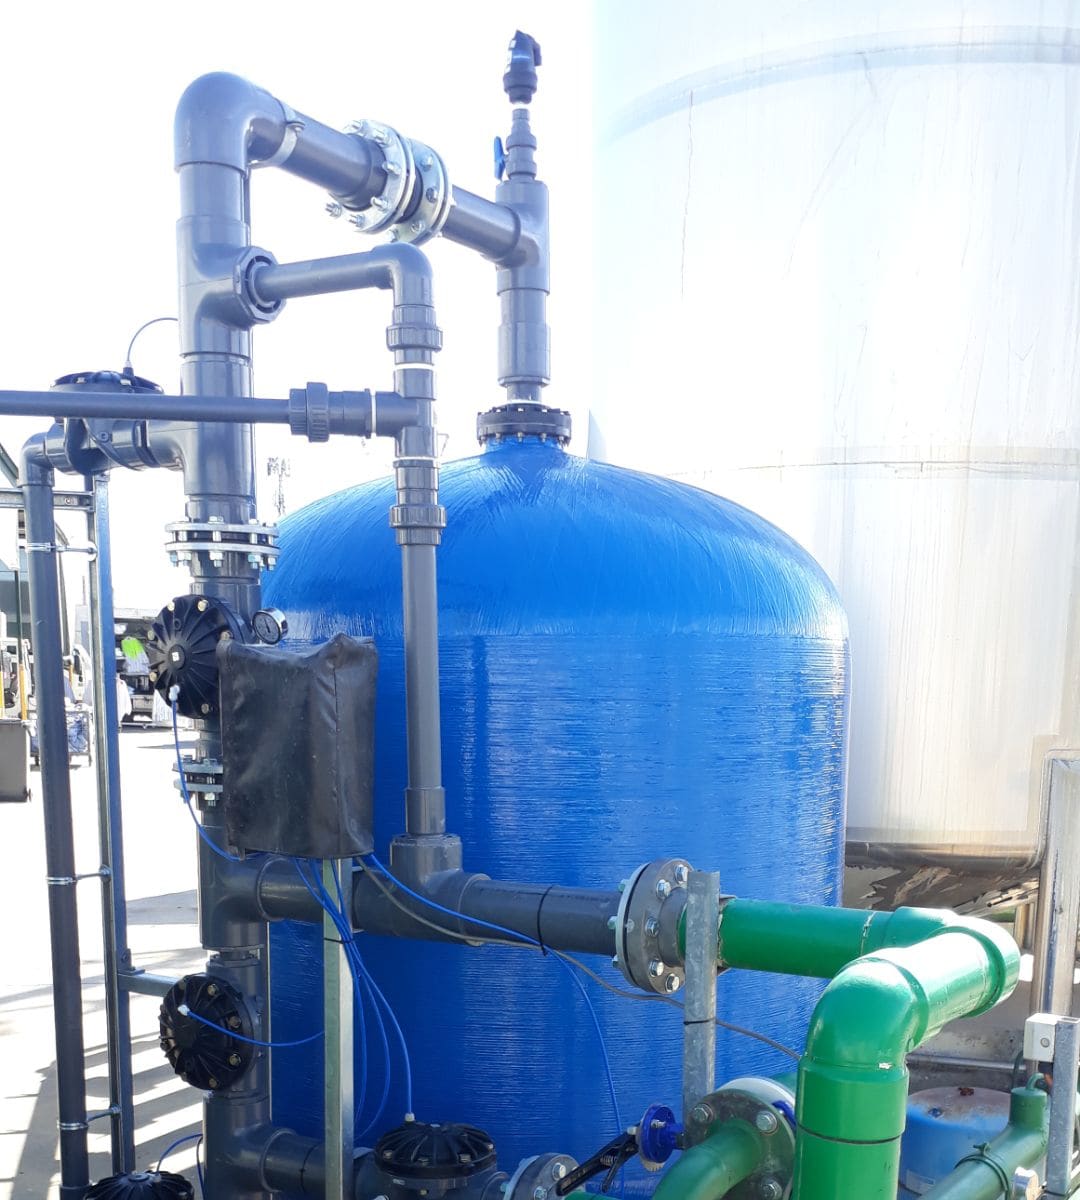 Demineralised Water Plant Melbourne